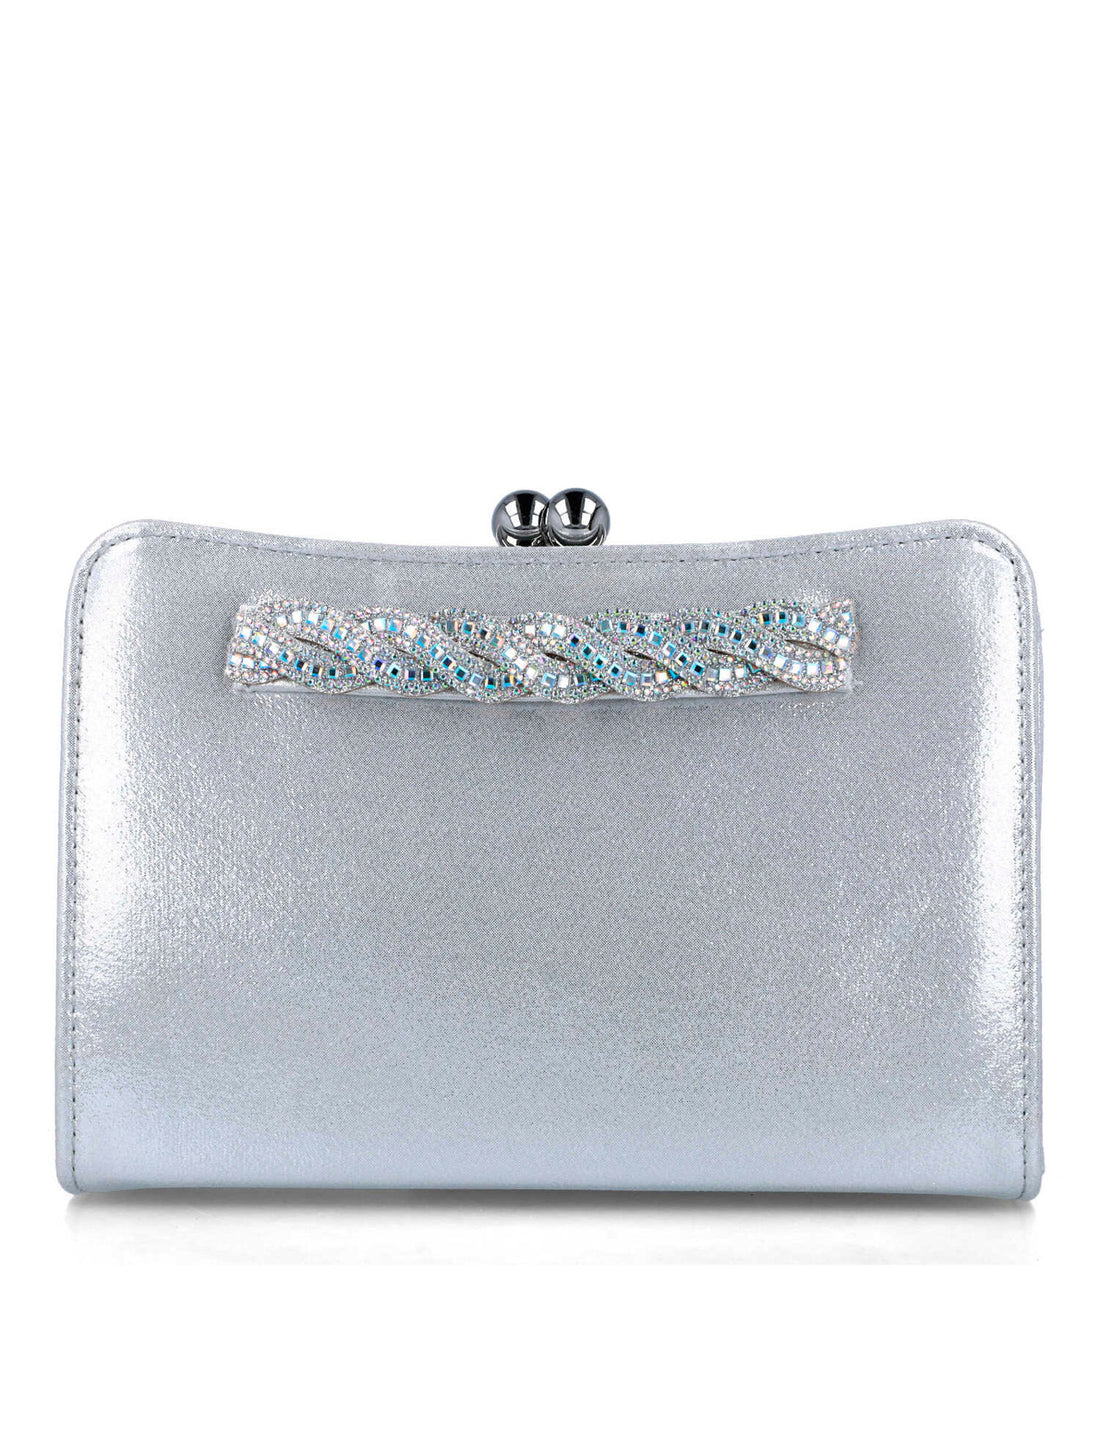 Silver Clutch With Embellished Hand Strap_85490_09_01